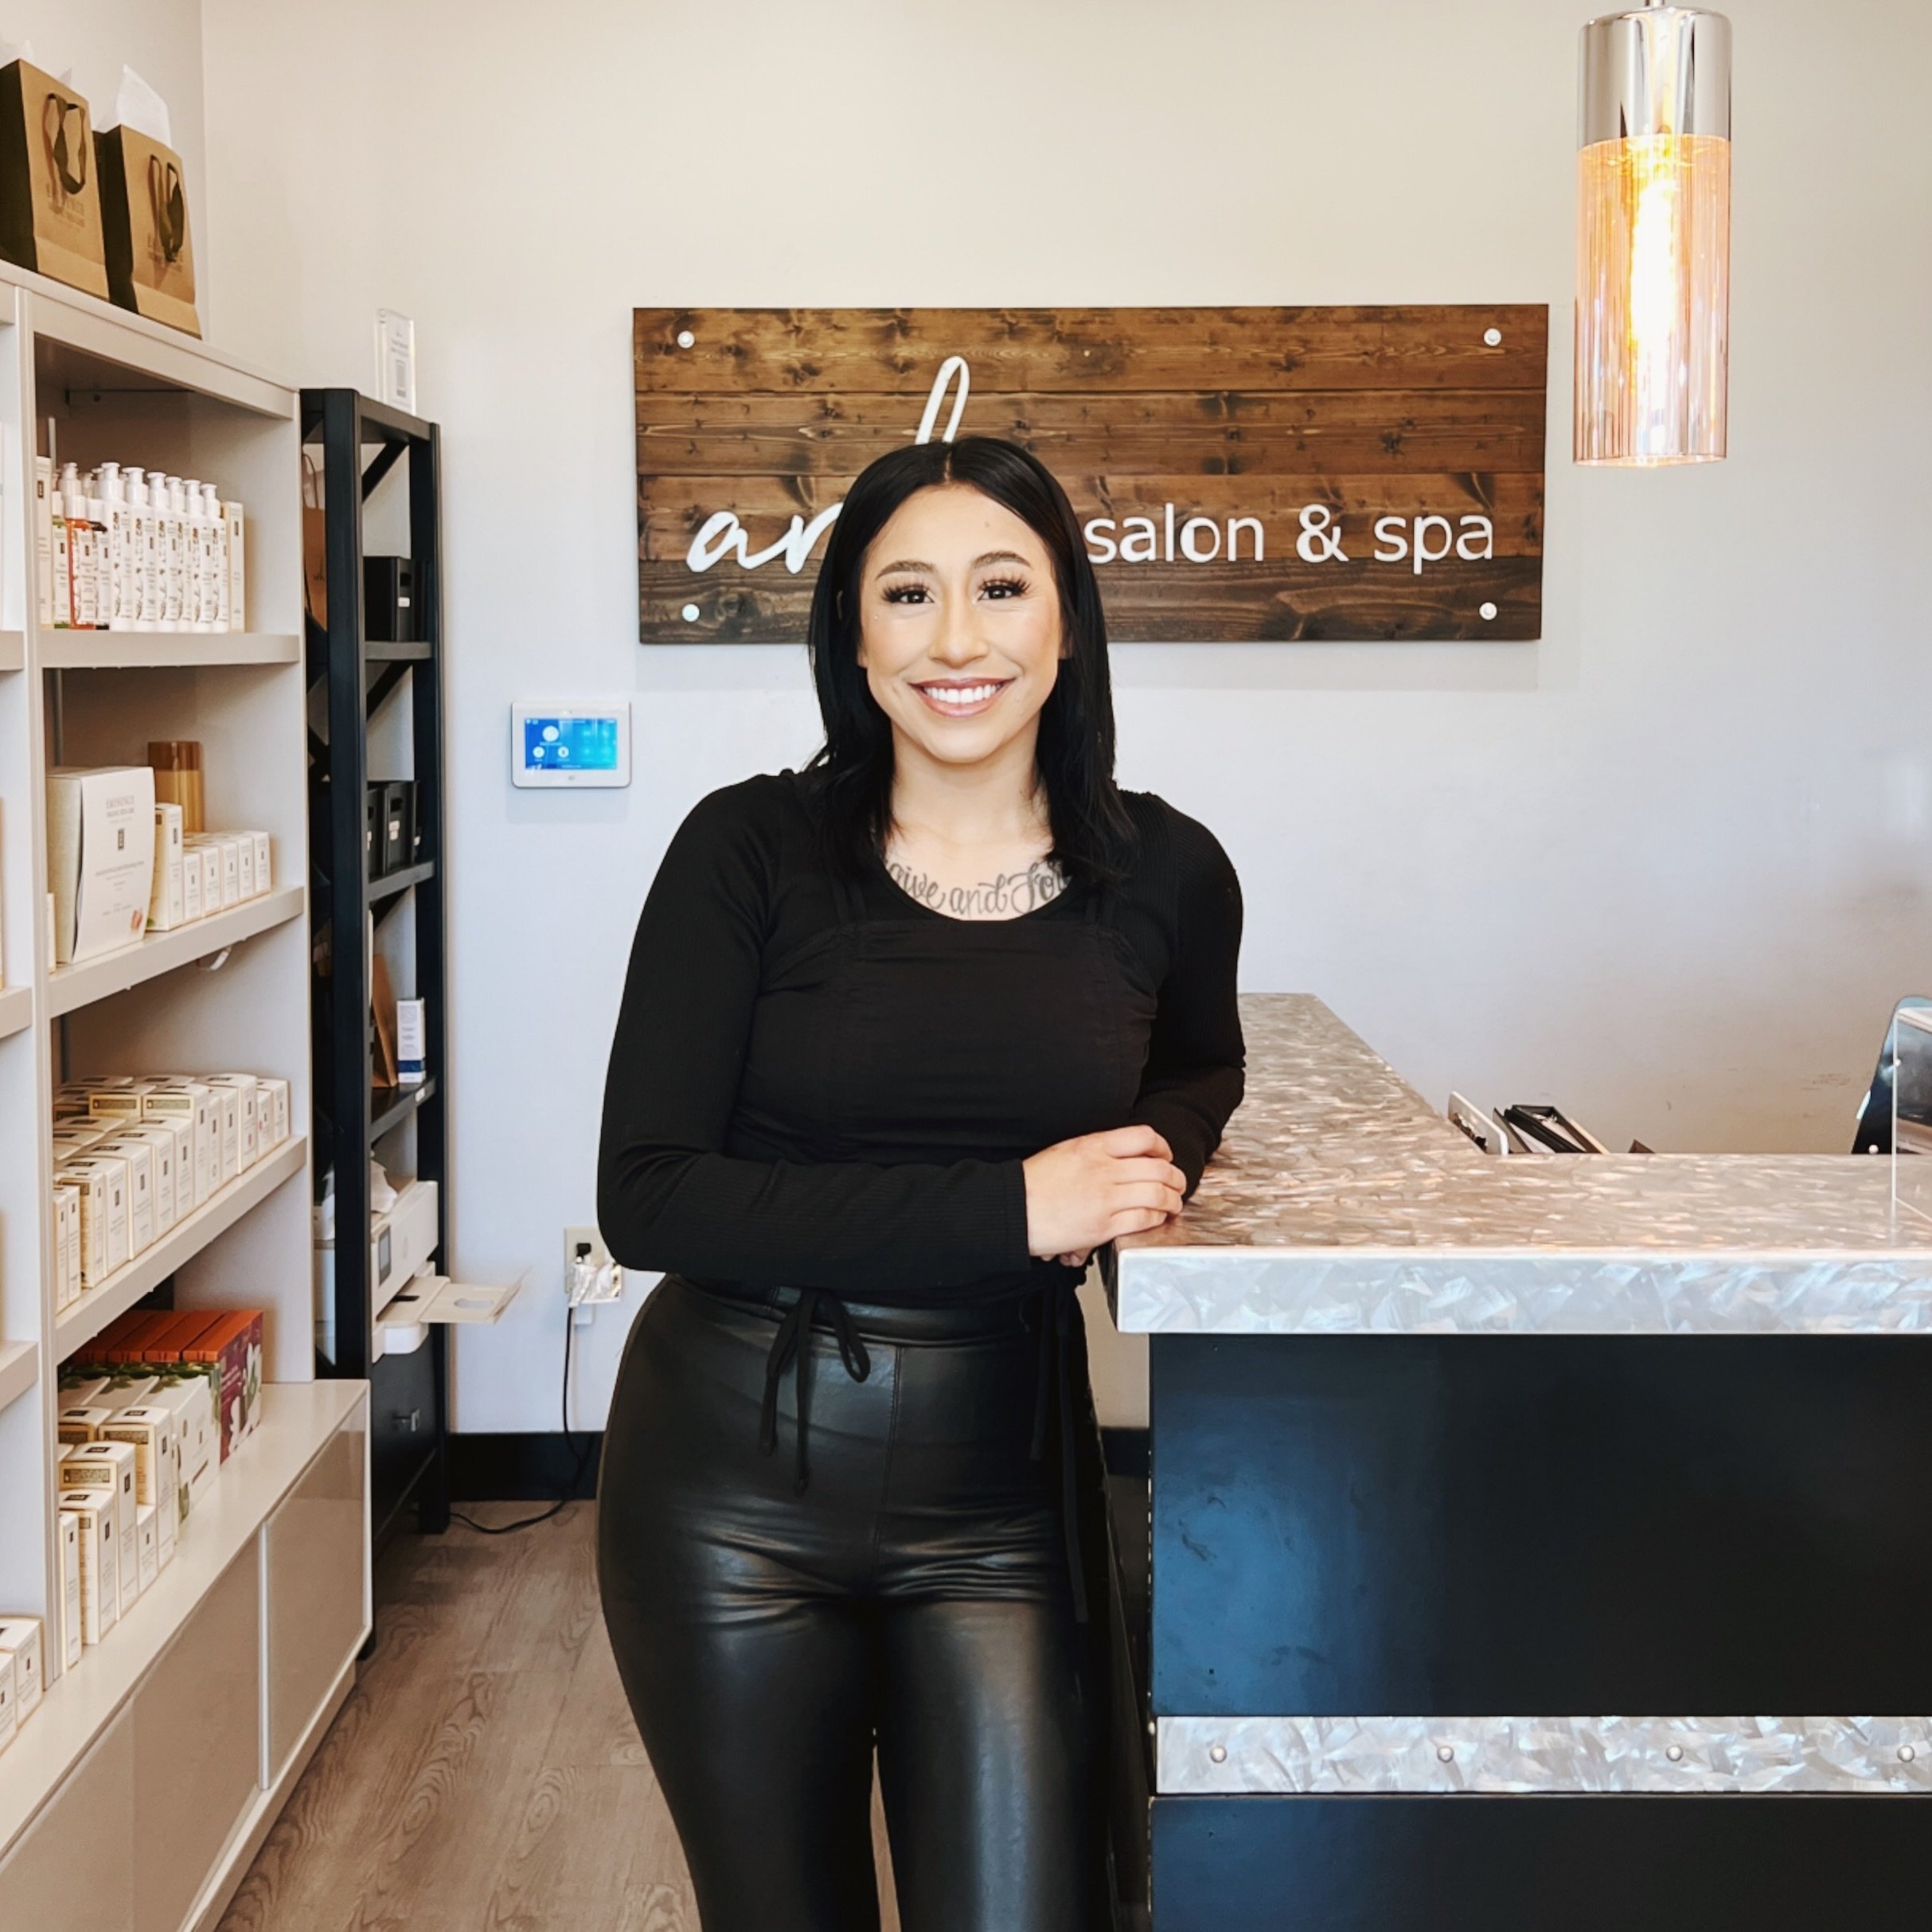 Please help us in welcoming our newest stylist Isabel!
She&rsquo;s been doing hair for 8 years and she&rsquo;s decided to expand her career here at Arch!
If you&rsquo;ve been trying to get in for hair, now&rsquo;s the perfect time!